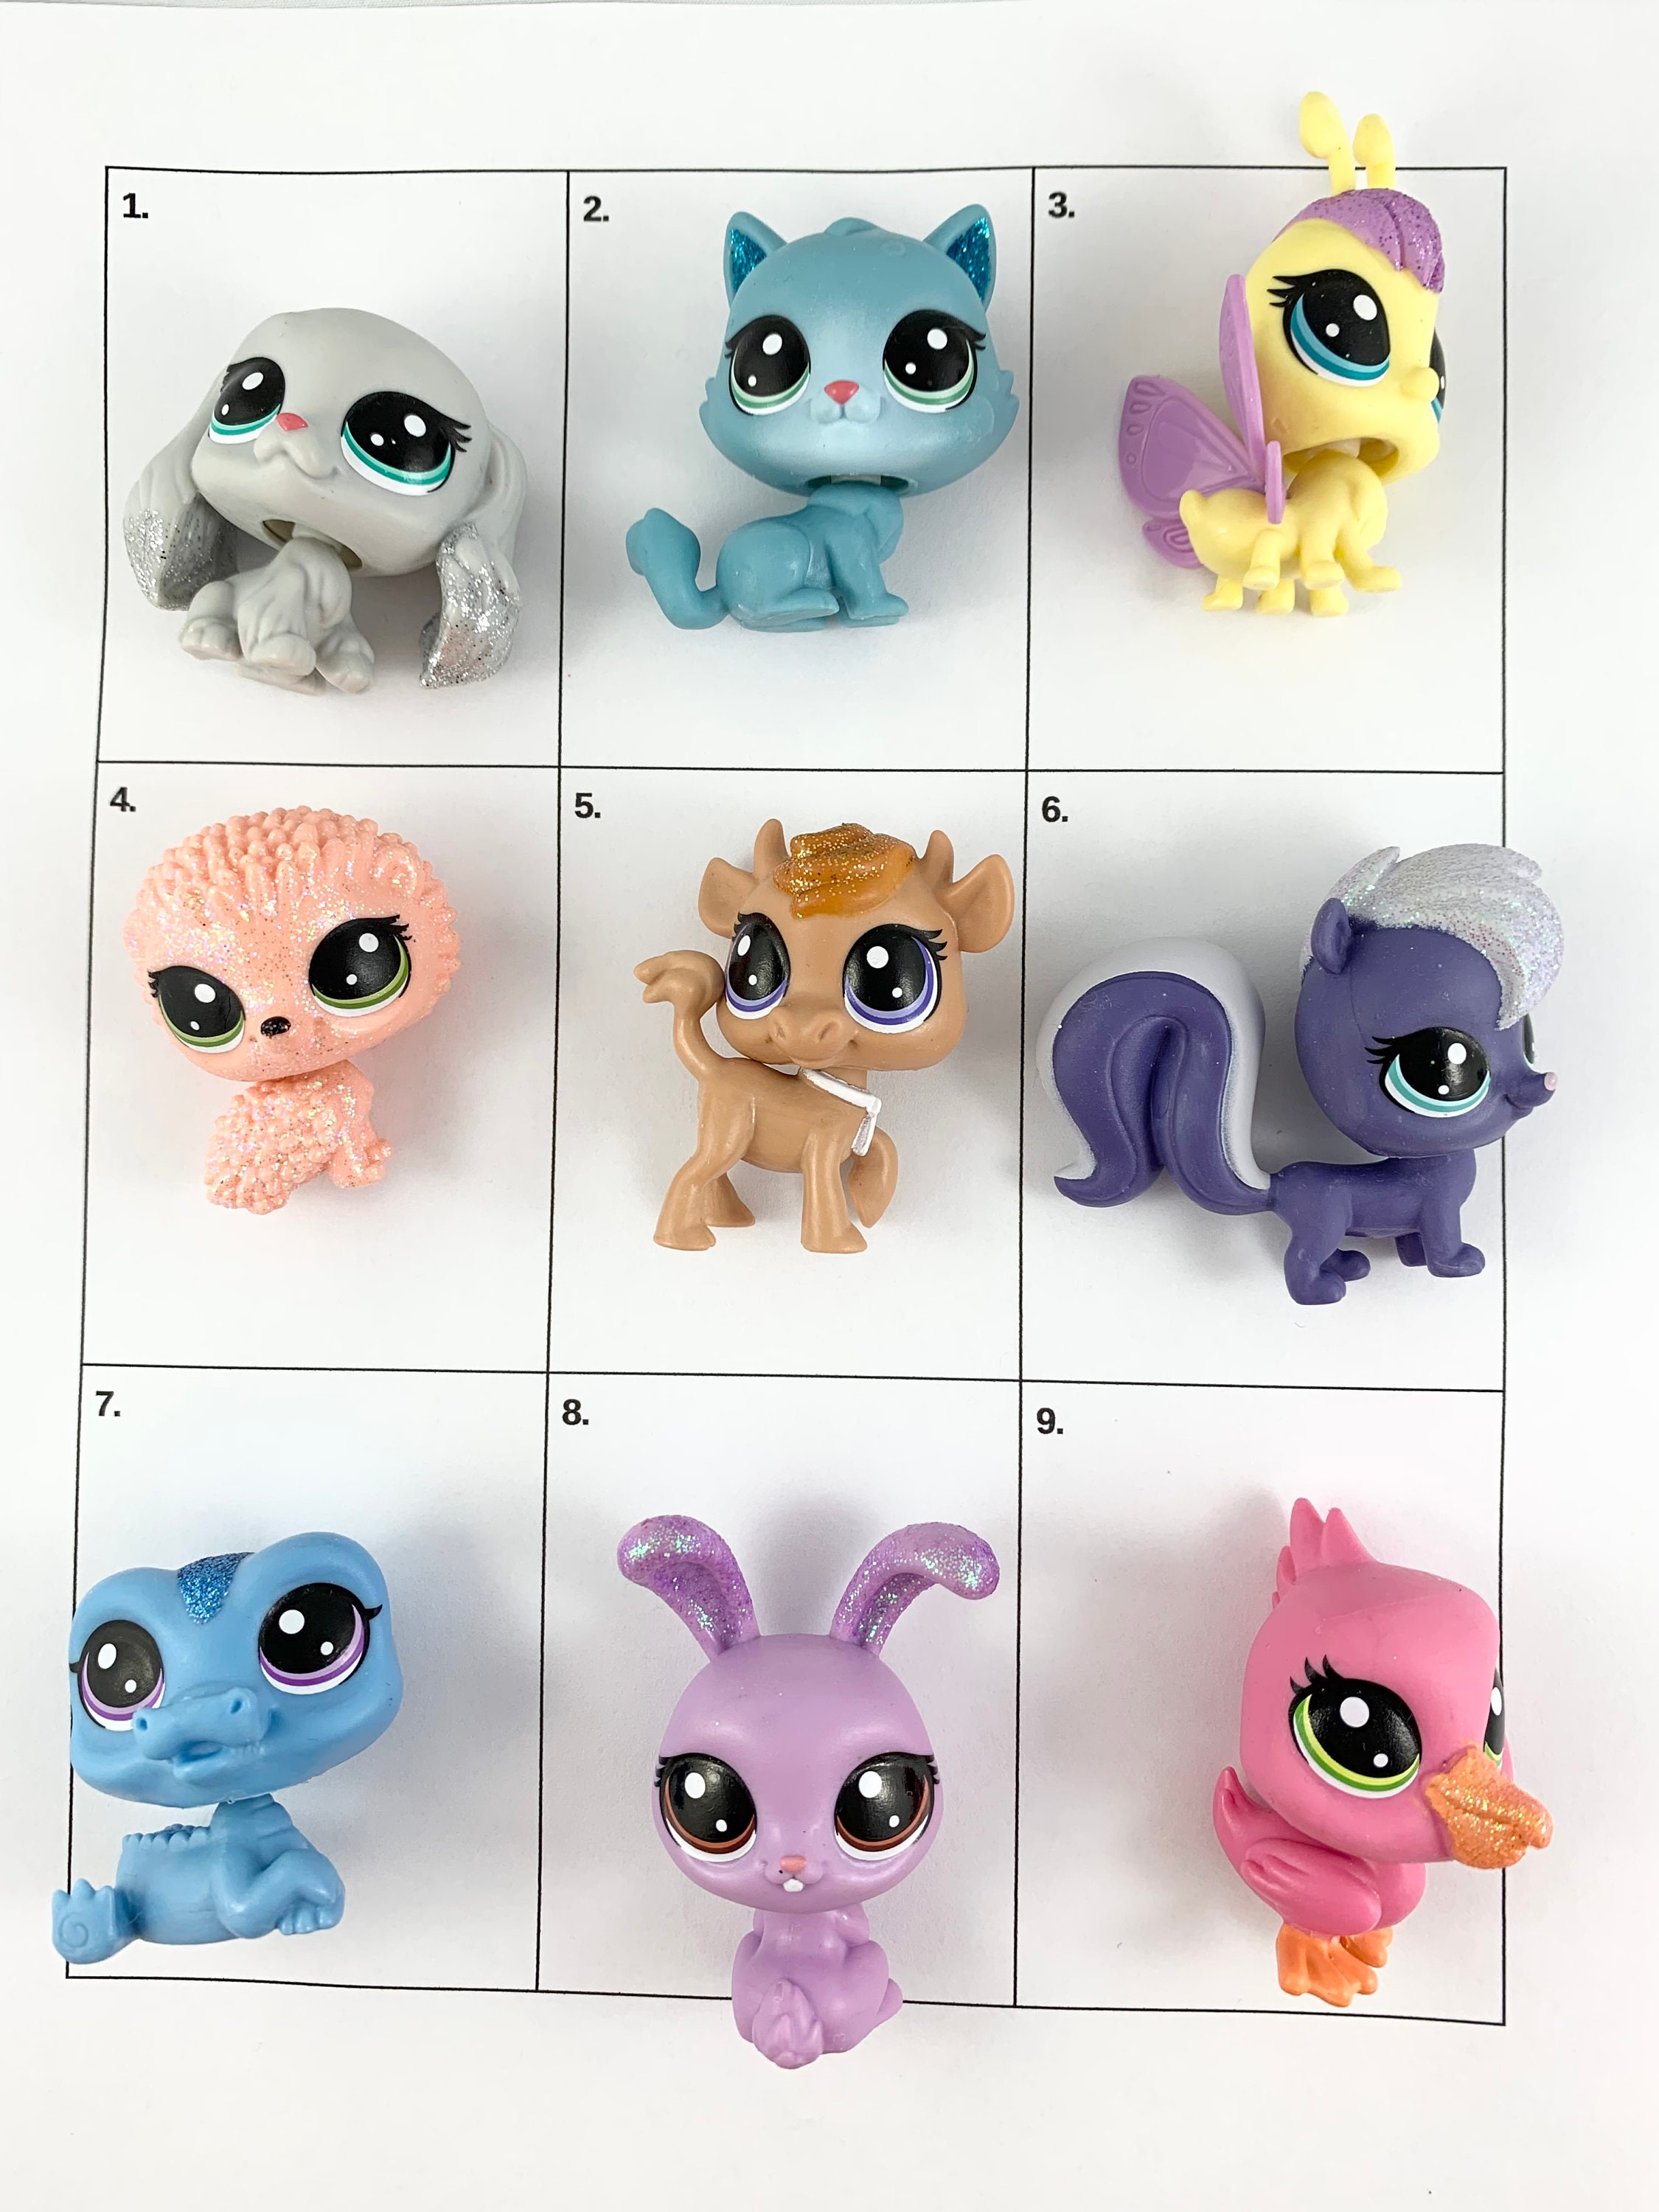 Littlest Pet Shop Pick a Pet 9 to Choose From. Crystal, Sparkle and More 